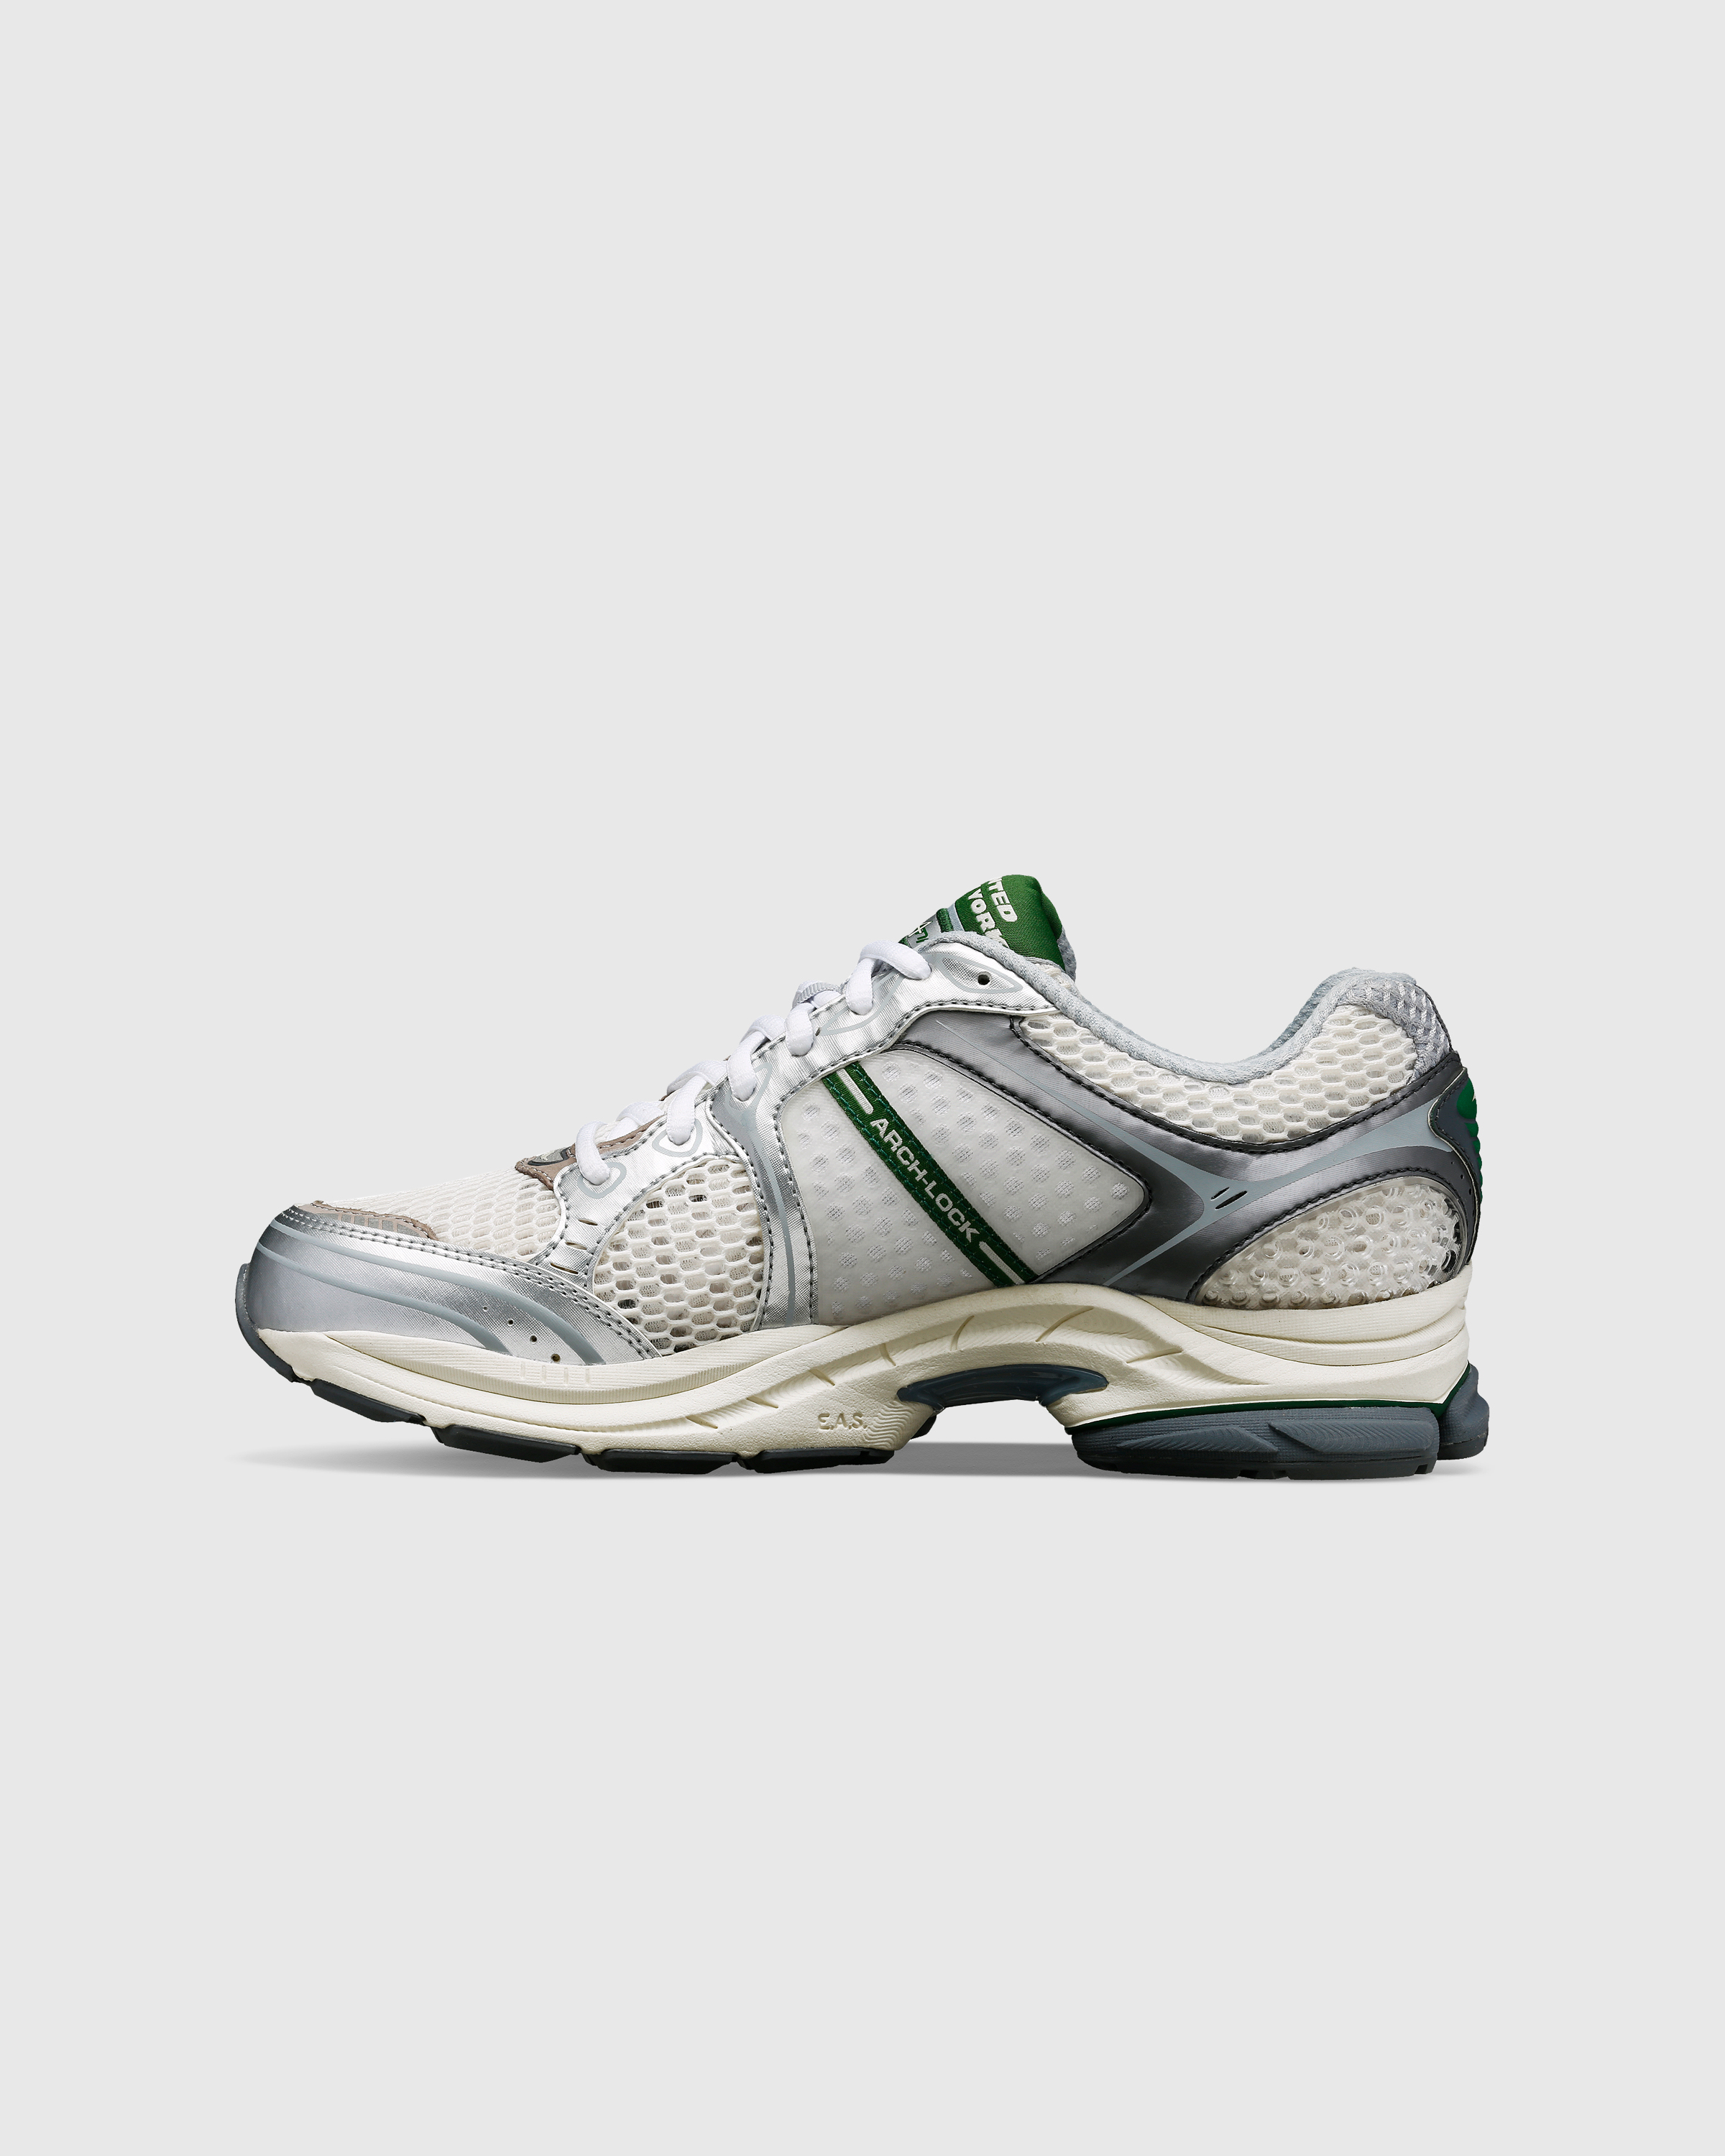 Saucony x Minted – ProGrid Triumph 4 Cream/Green - Low Top Sneakers - Beige - Image 2